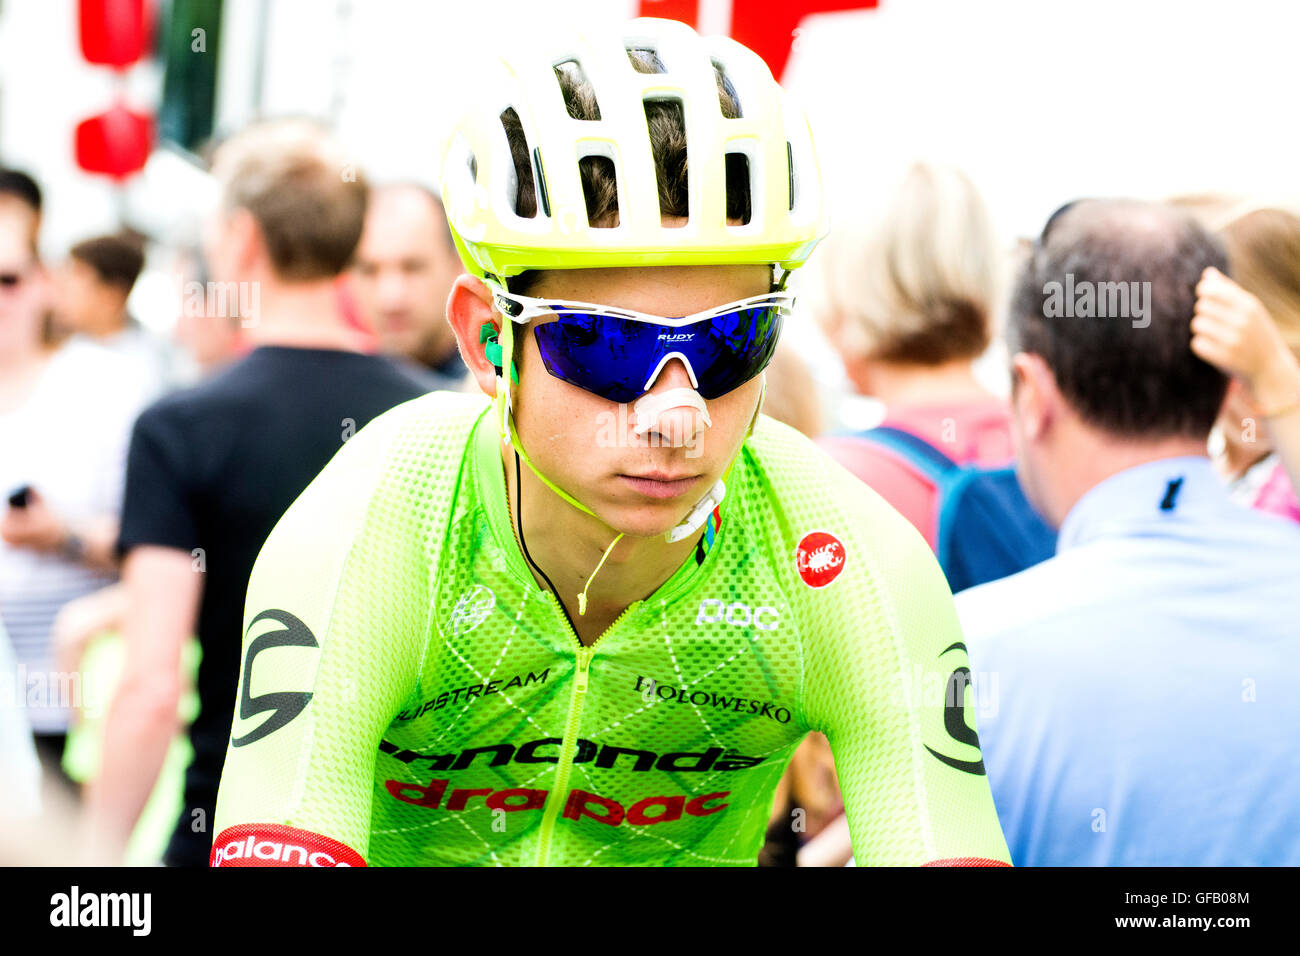 San Sebastian, Spain. 30th July, 2016. David Formolo (Cannondale Drapac Team) during the 36th edition of the San Sebastian Classic (Clasica de San Sebastian), a race of one day of 2016 UCI World Tour, at Mayor Square on July 30, 2016 in San Sebastian, Spain. Credit: David Gato/Alamy Live News Stock Photo